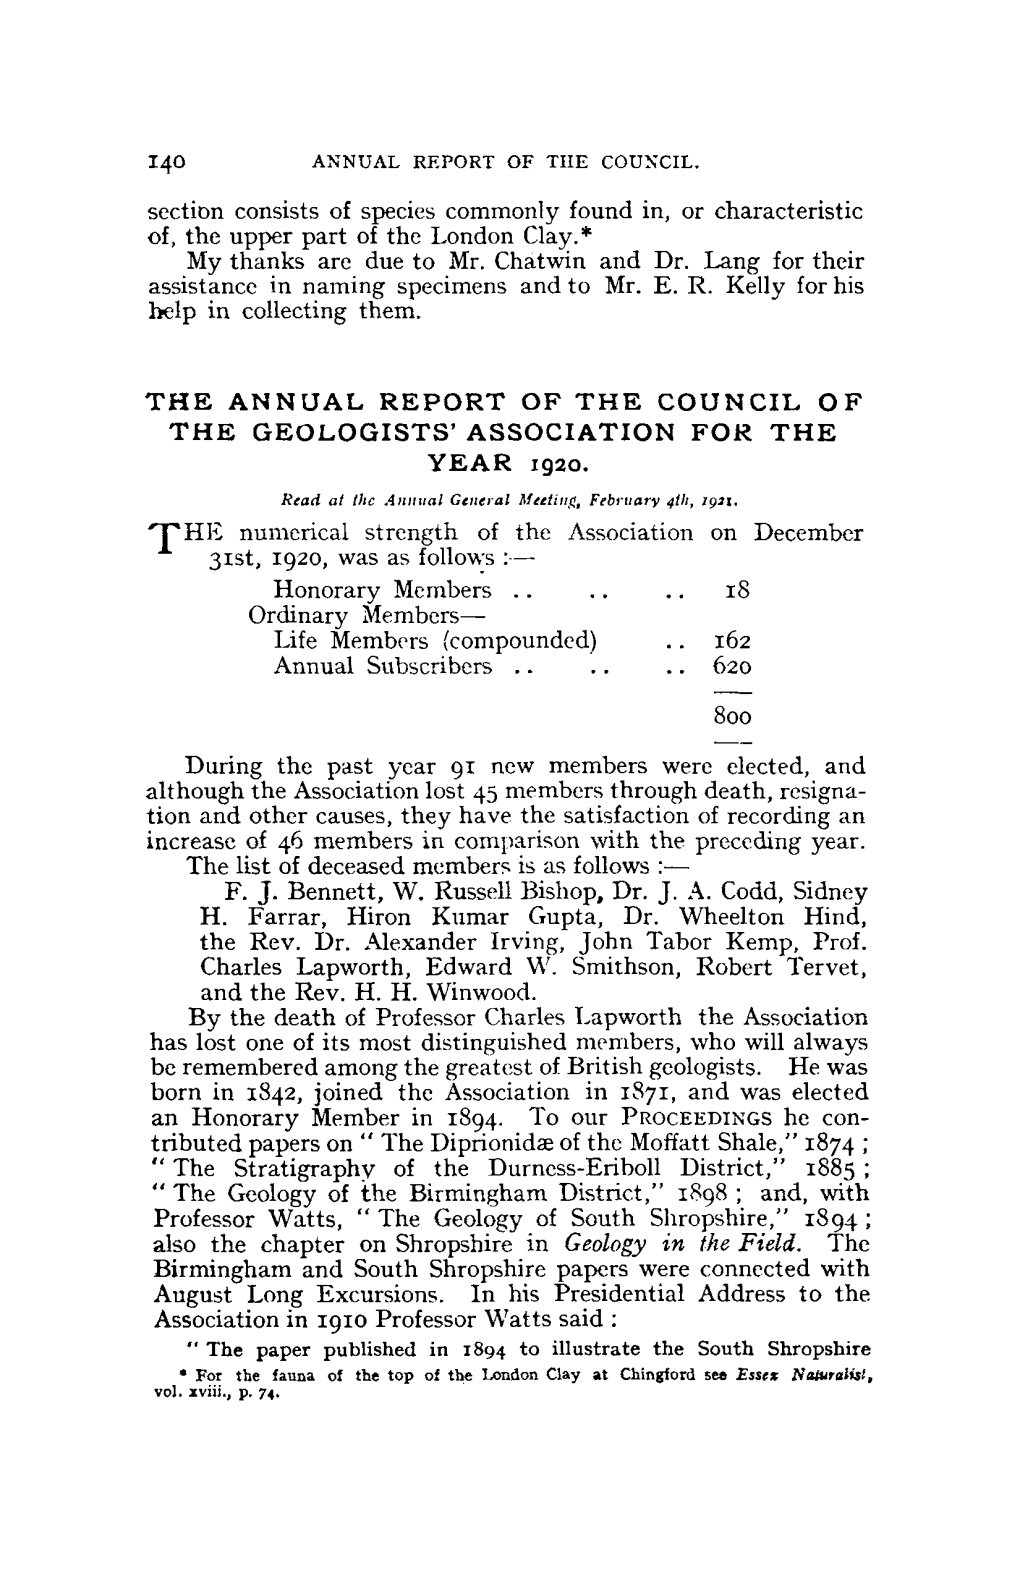 The Annual Report of the Council of the Geologists' Association for the Year 1920